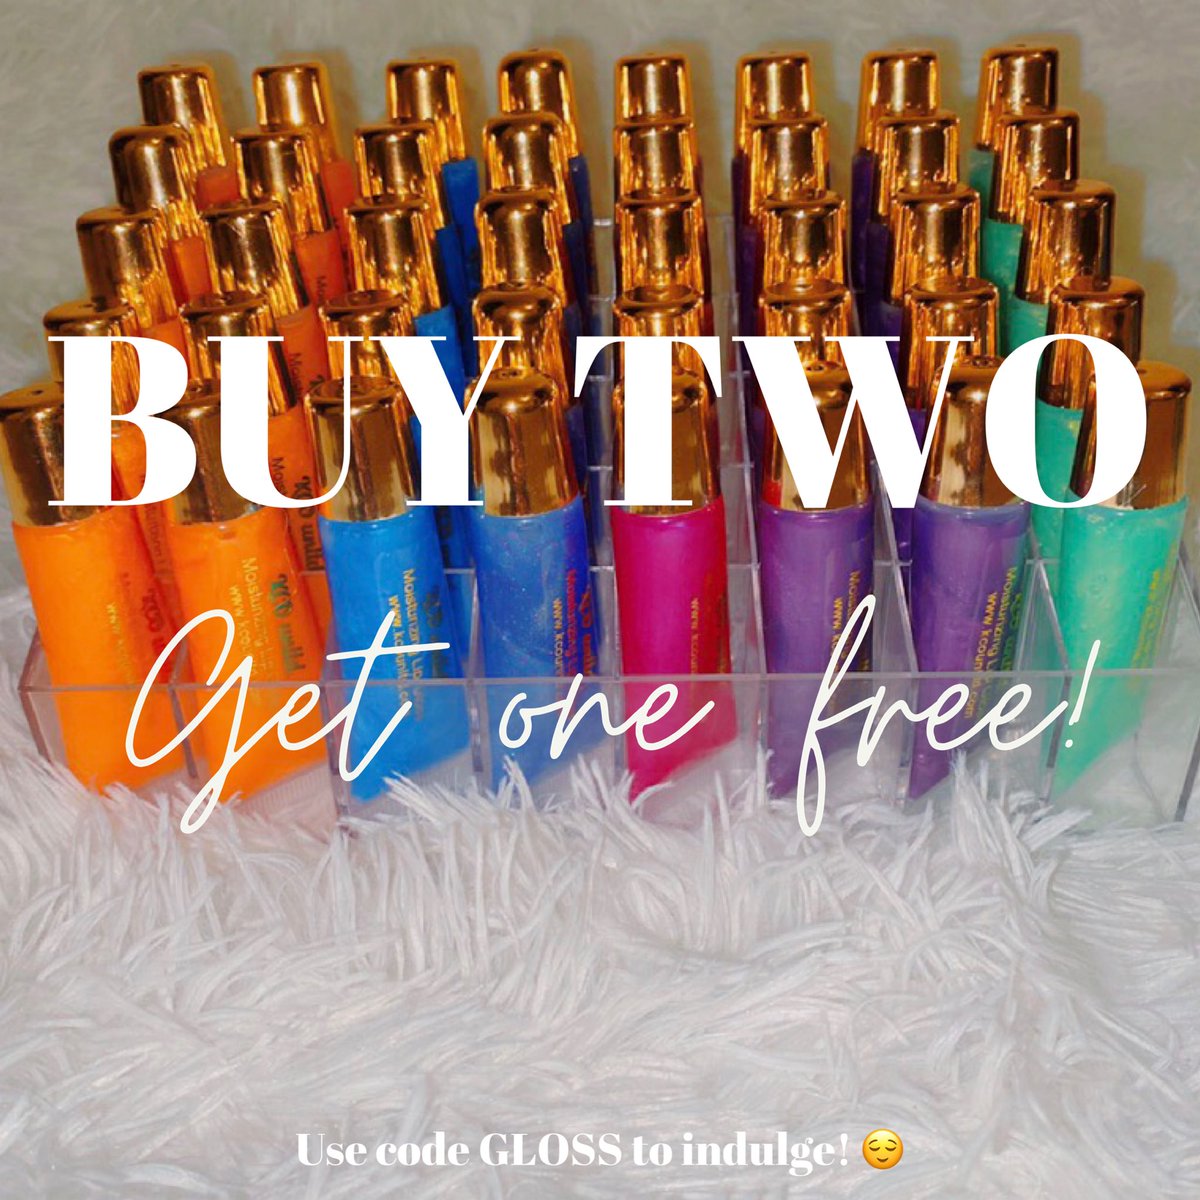 This sale is still active! Must have three glosses in the cart for code to work. 💗 #SupportBlackBusiness #BlackOwnedBusinesses #veganlipgloss #crueltyfree #Sales kcounltd.com